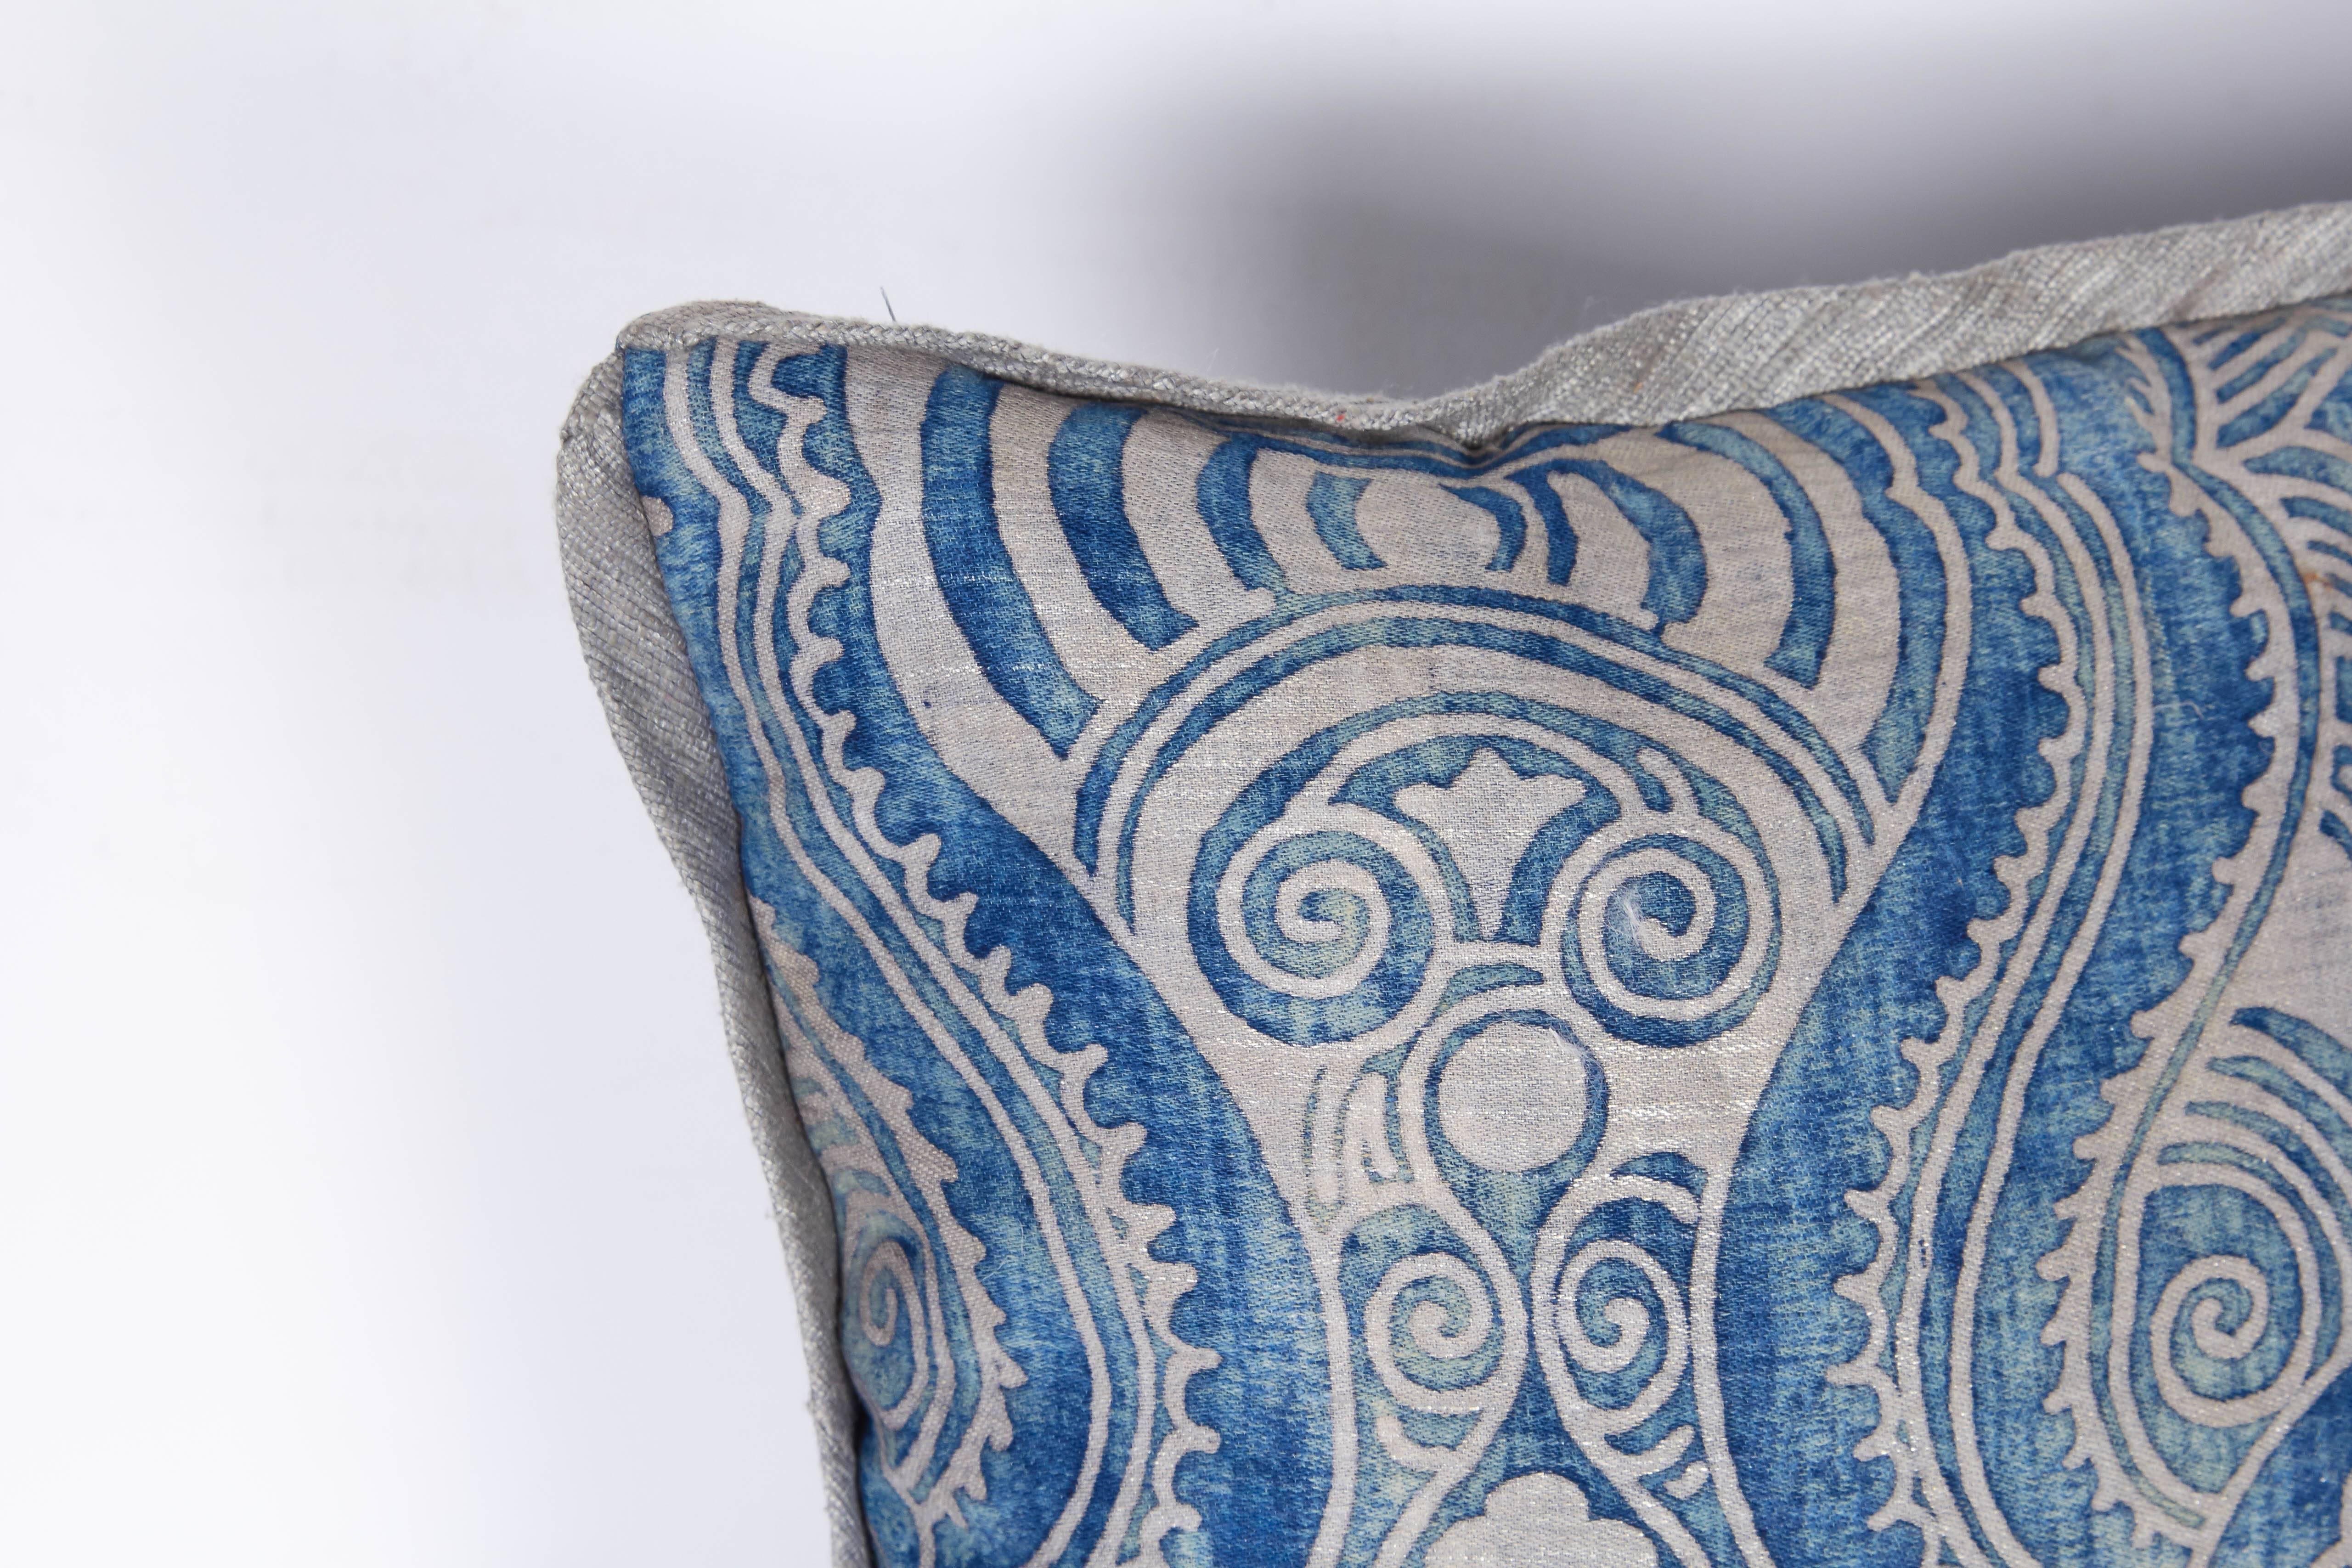 American A Pair of Fortuny Fabric Lumbar Cushions in the Peruviano Pattern